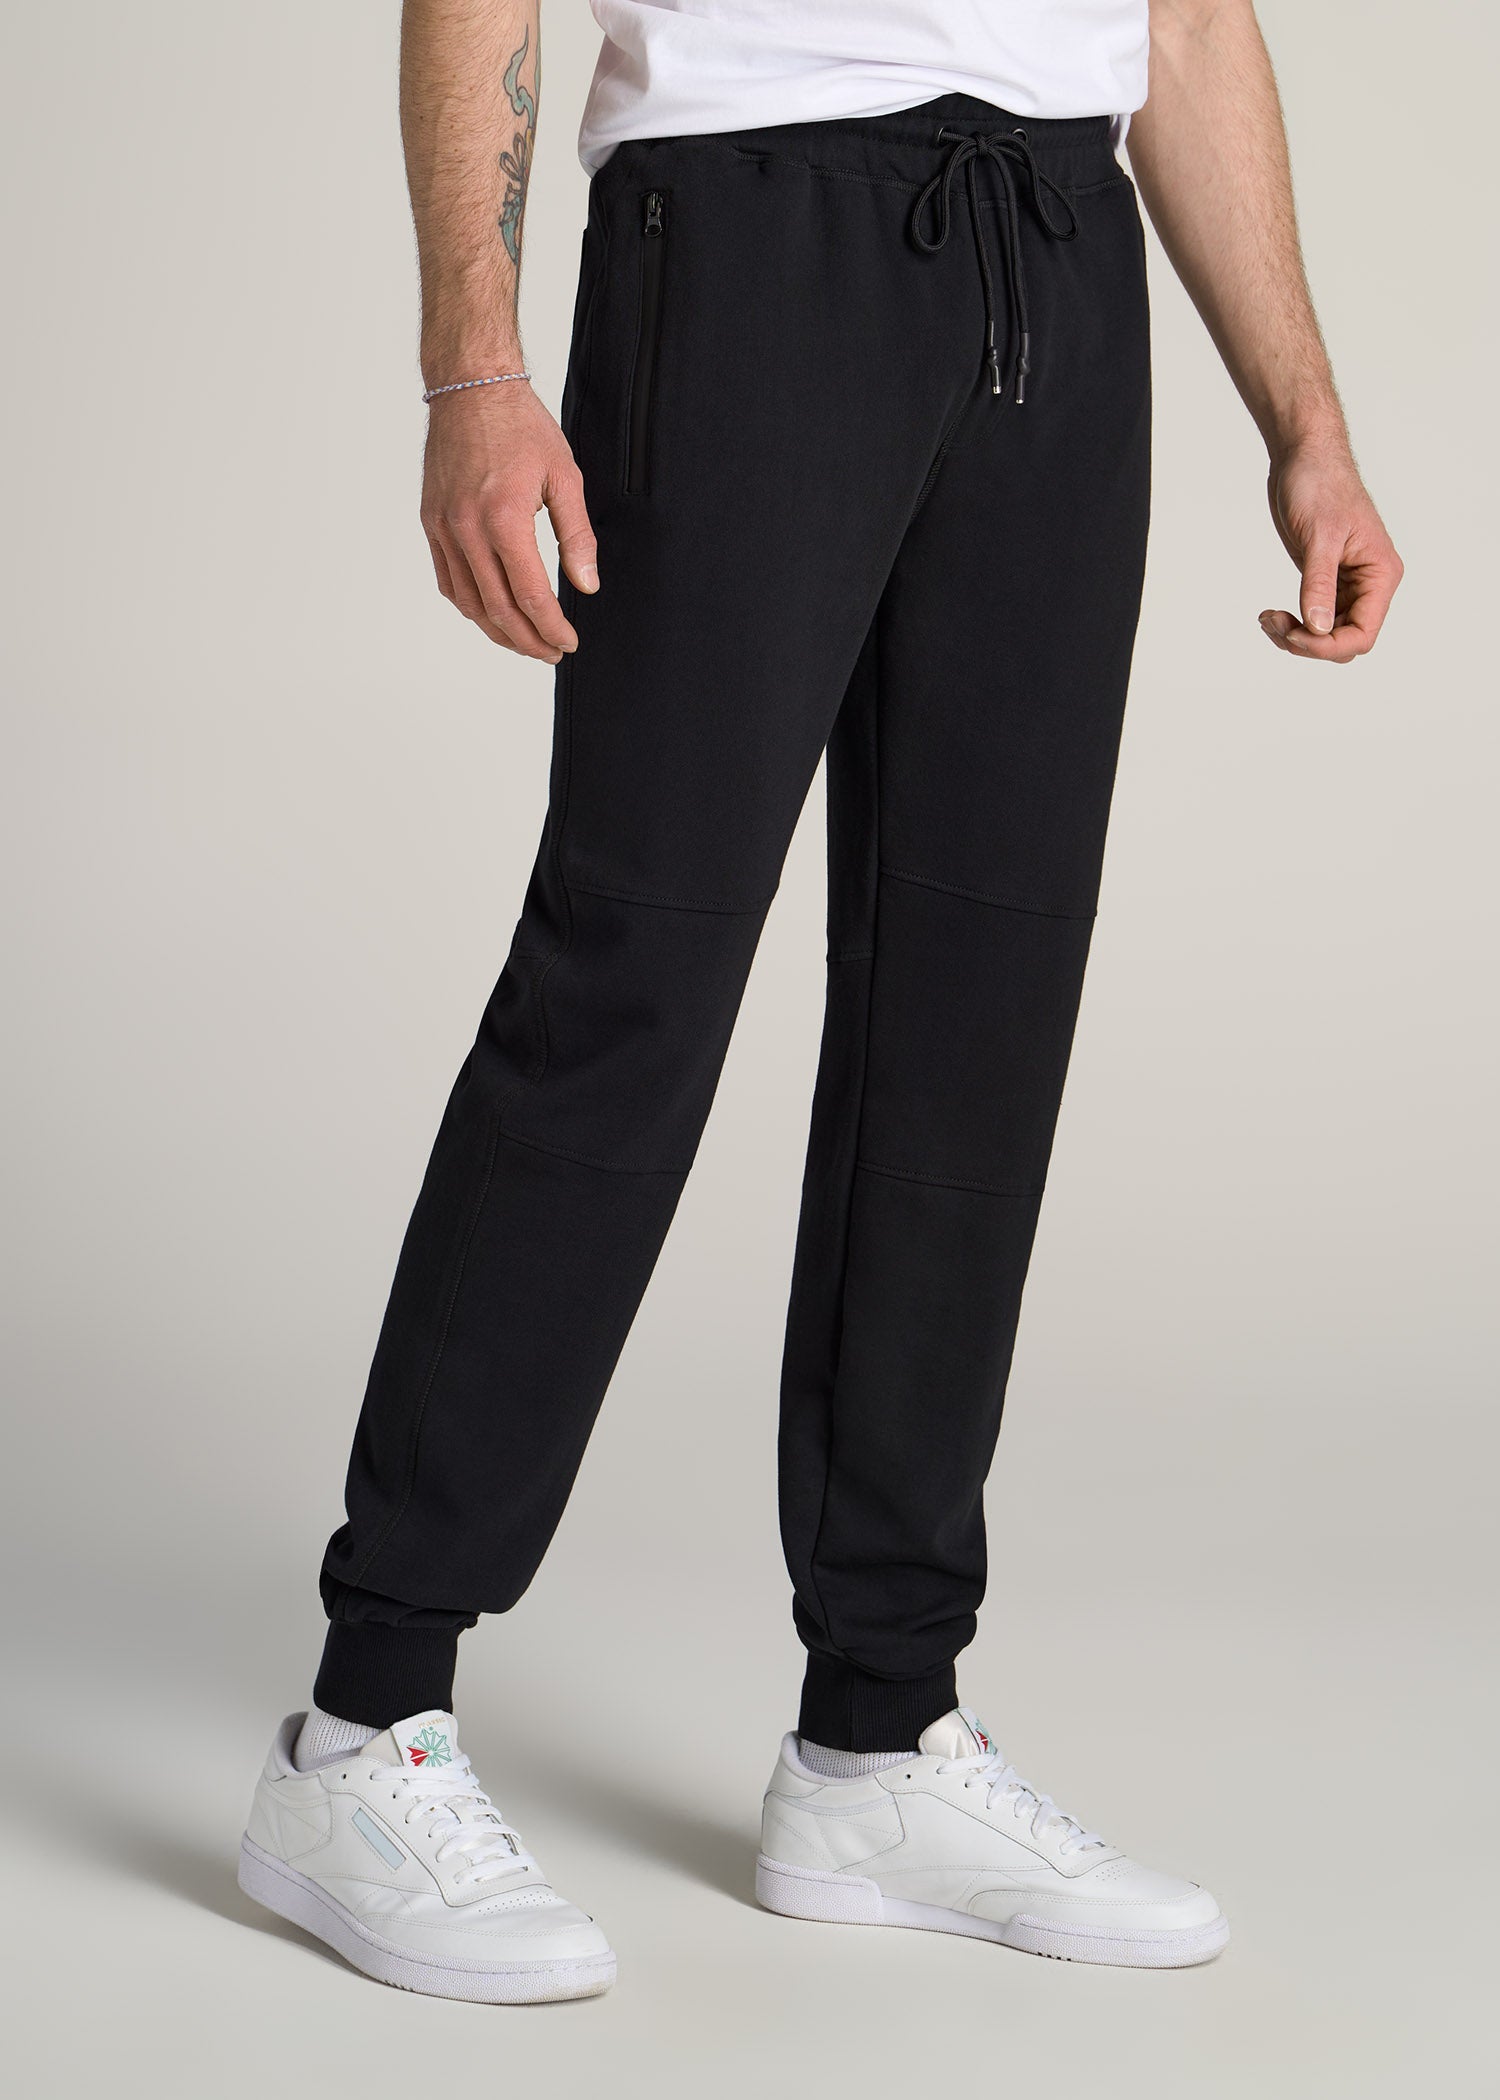 Wearever French Terry Men's Tall Joggers Black